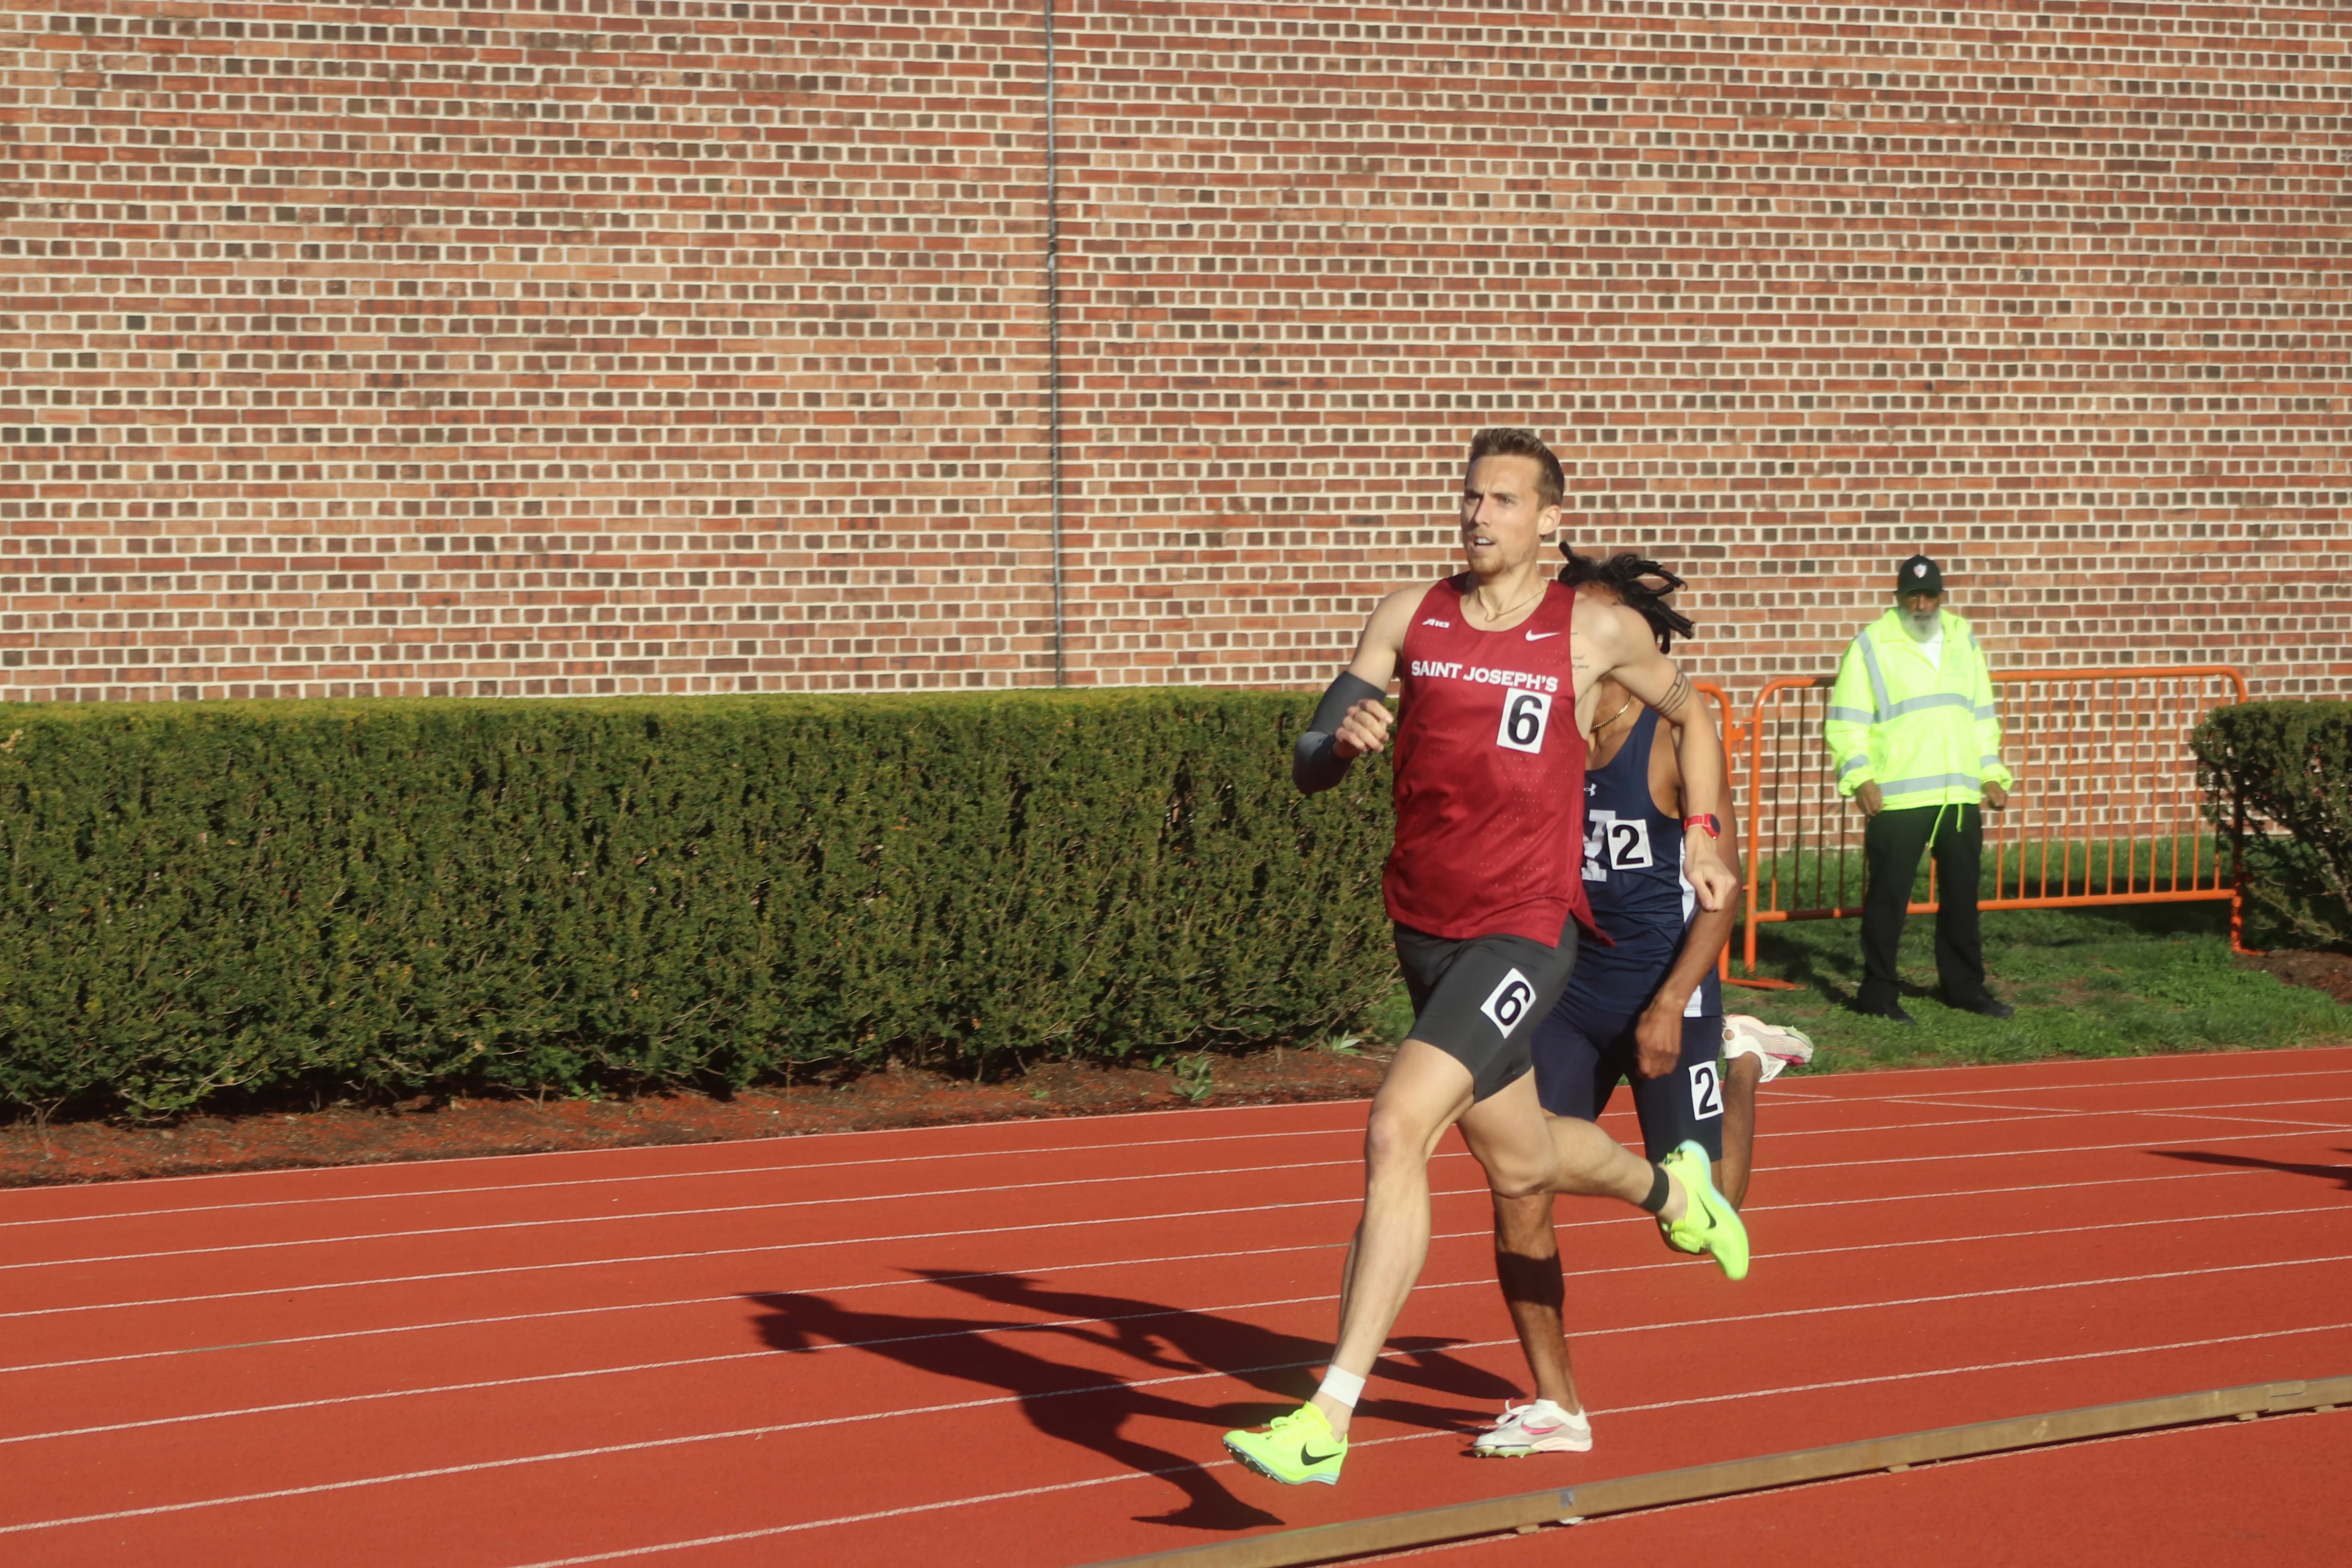 St. Joe's senior Gavin Campbell is set to compete at the Penn Relays.